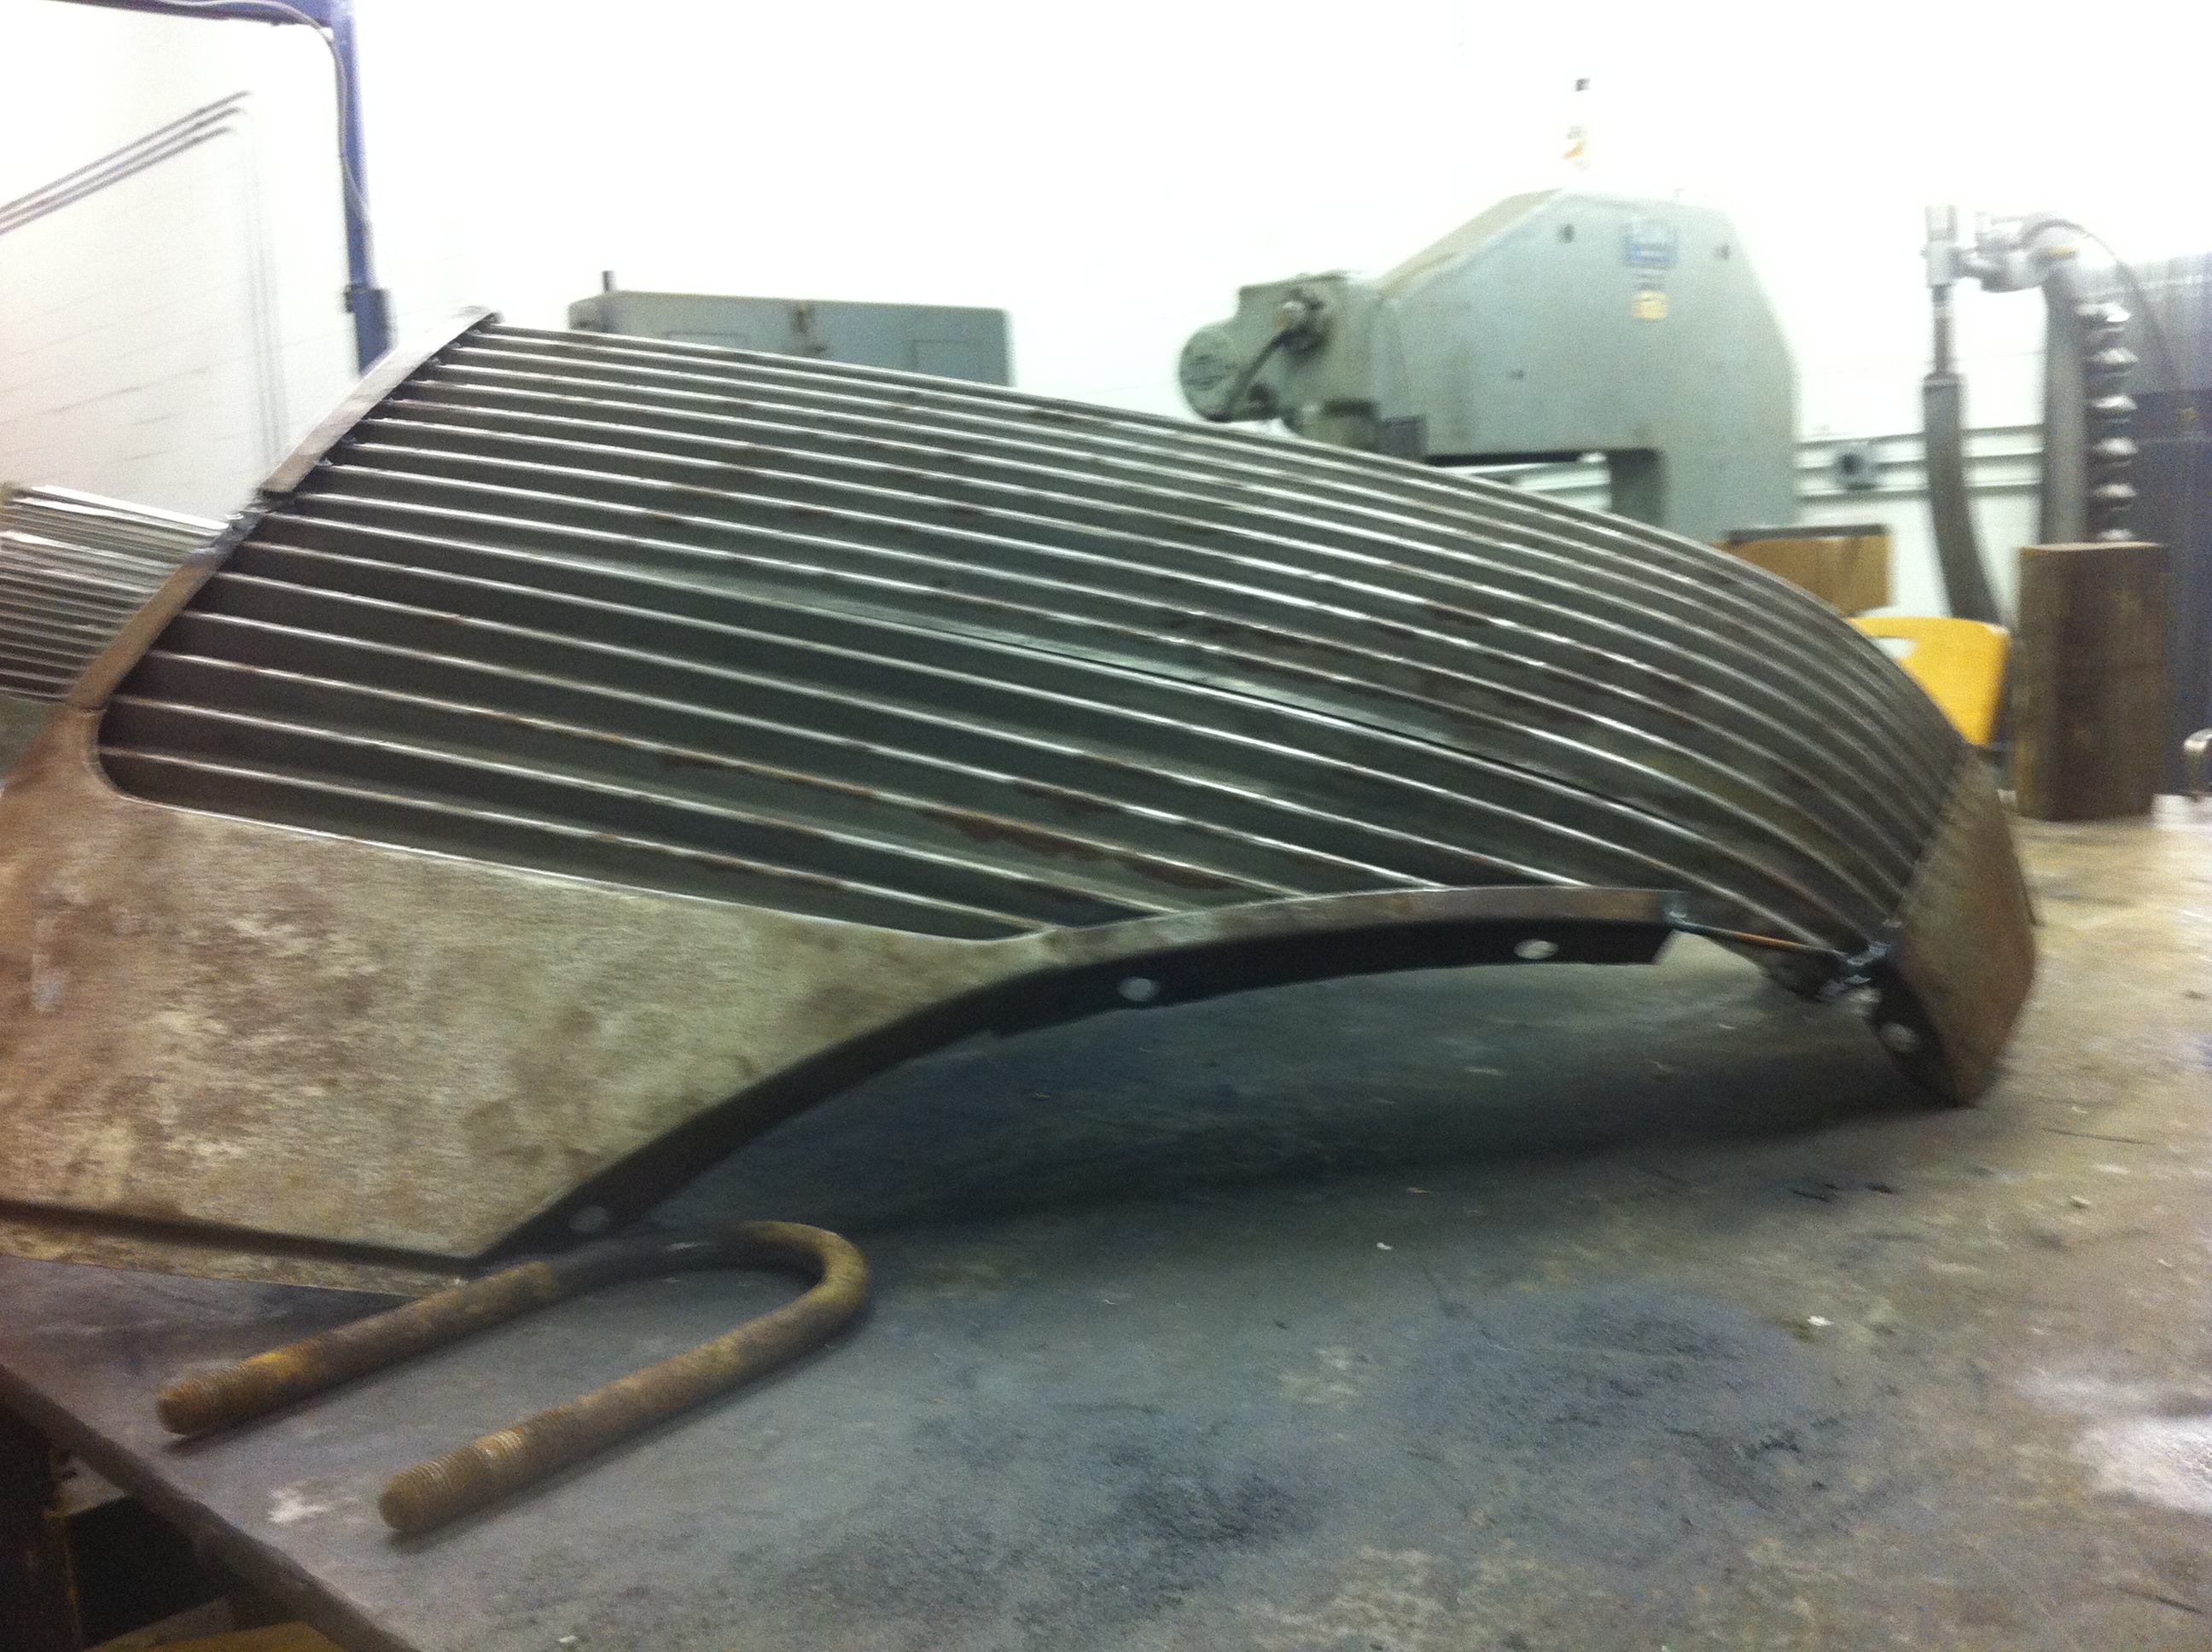 Grill for 1936 Ford Roadster